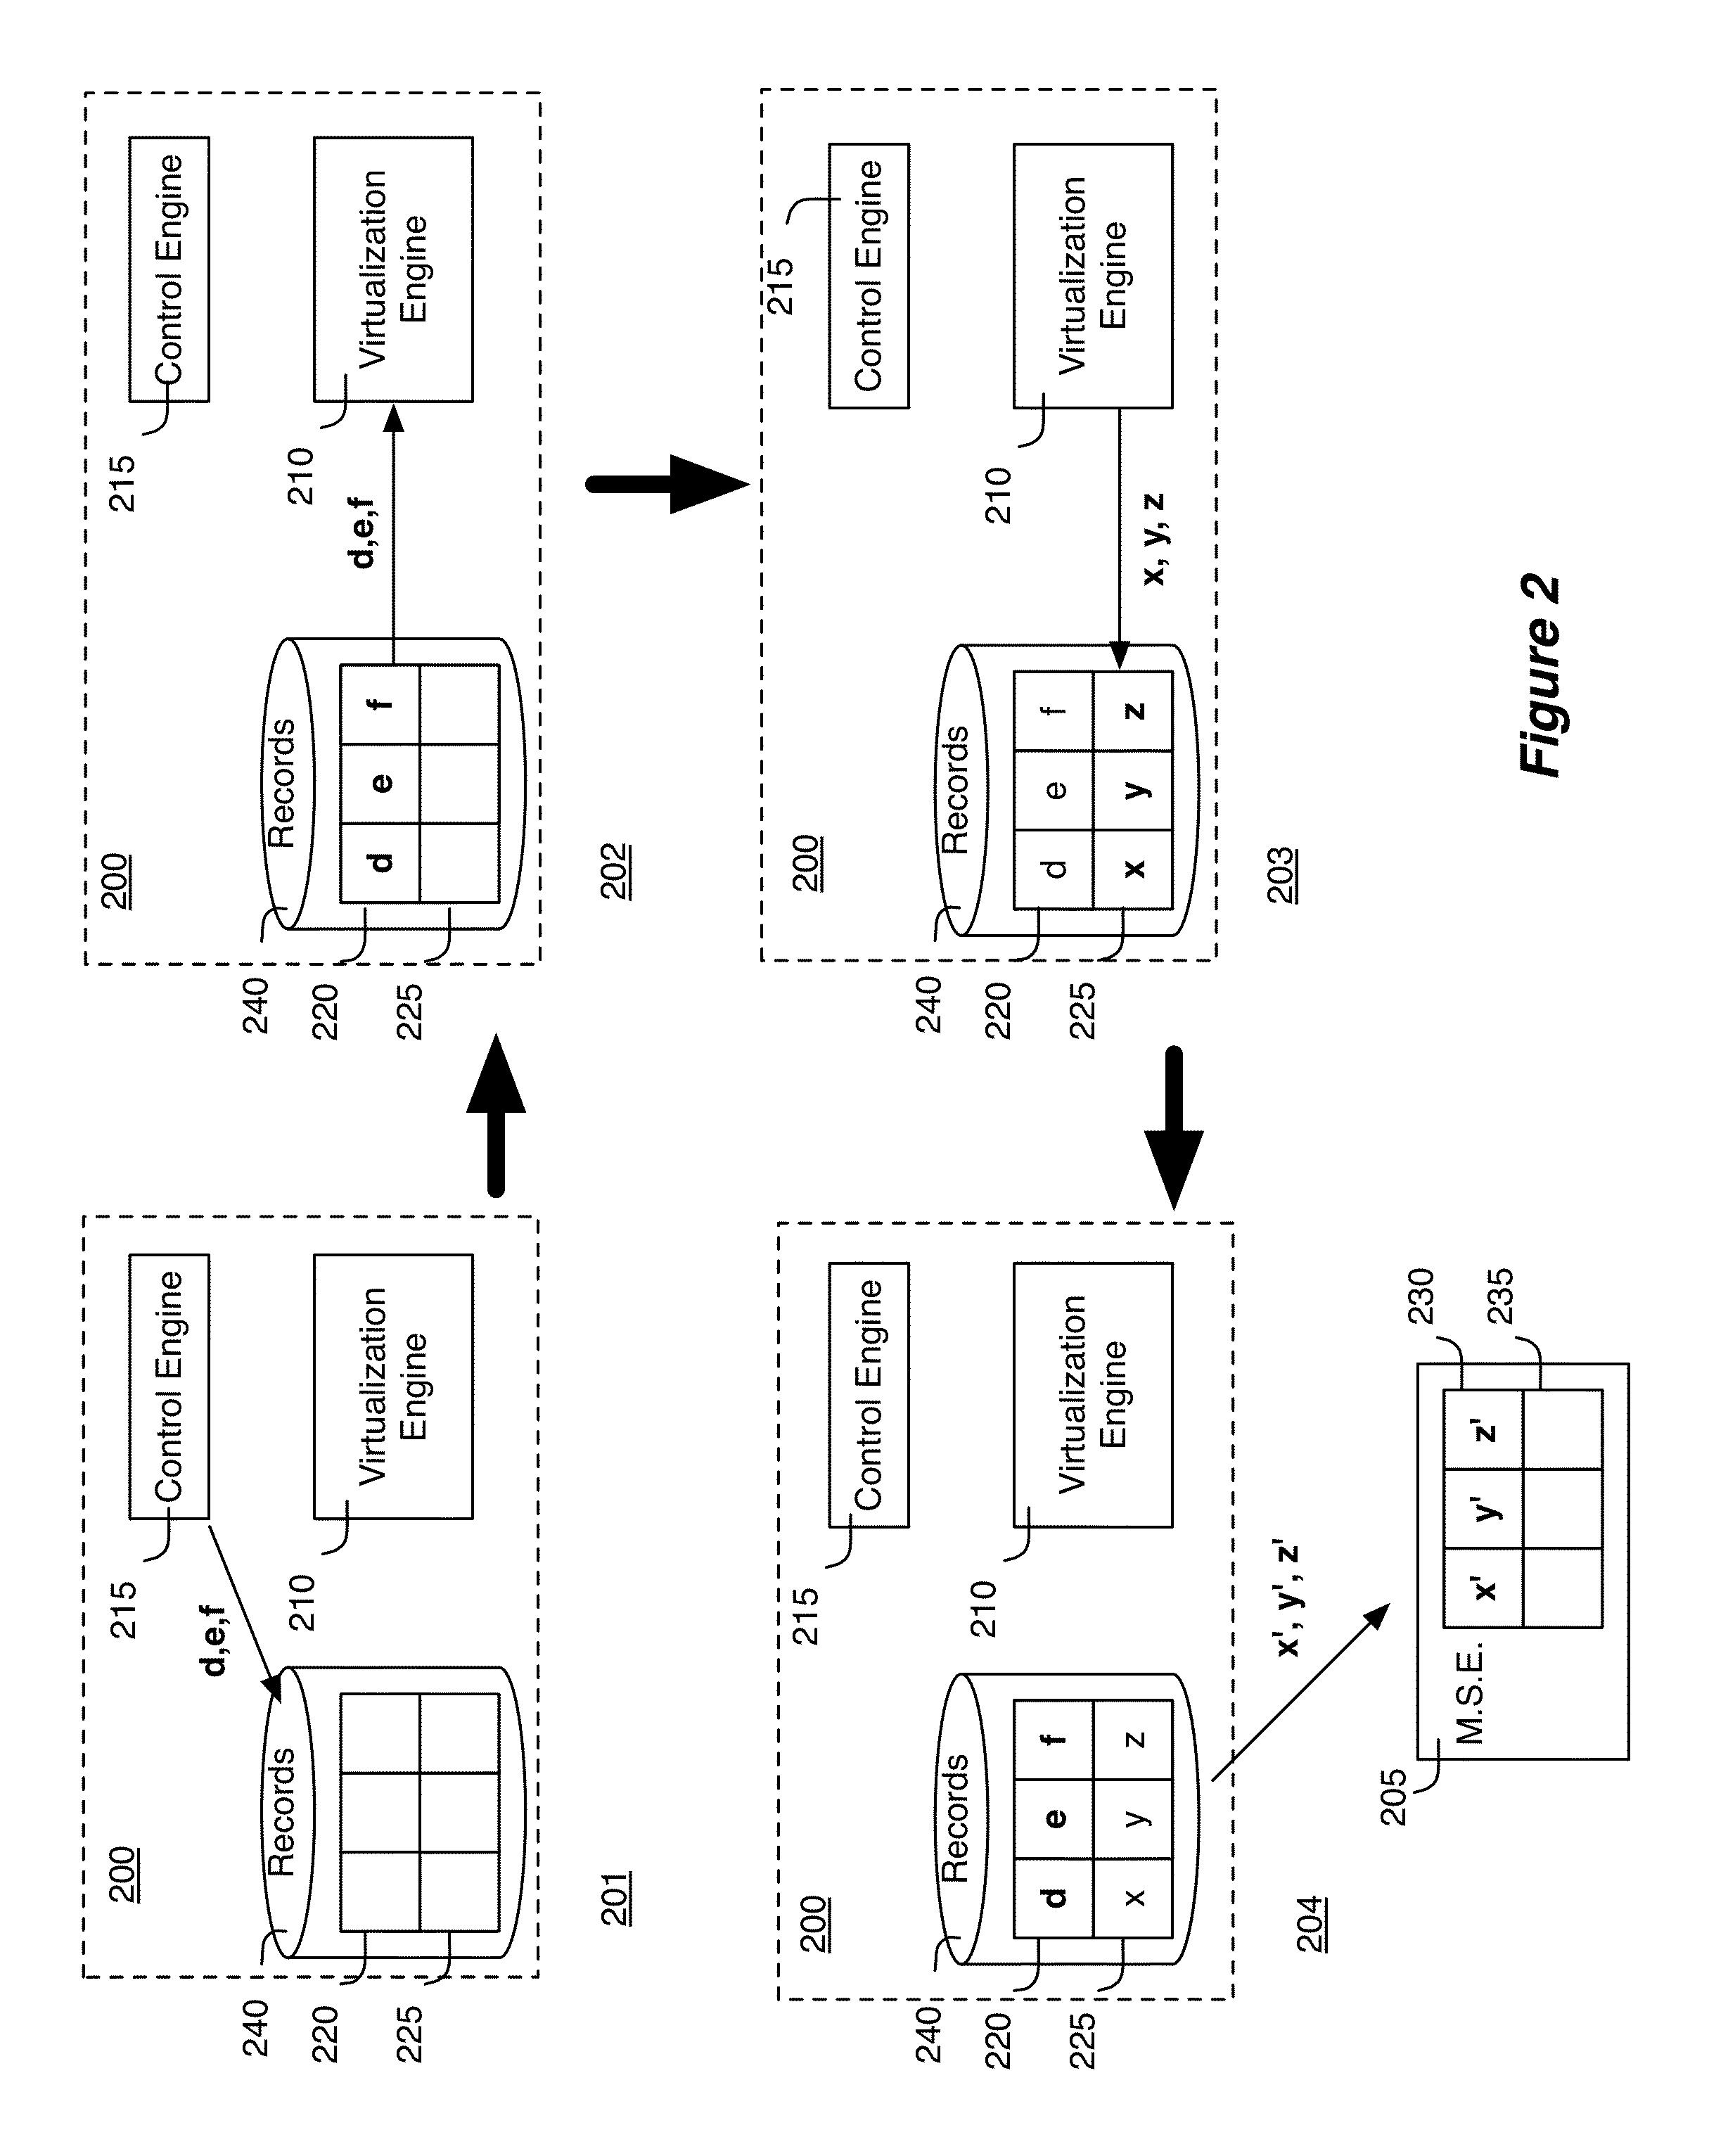 Maintaining quality of service in shared forwarding elements managed by a network control system